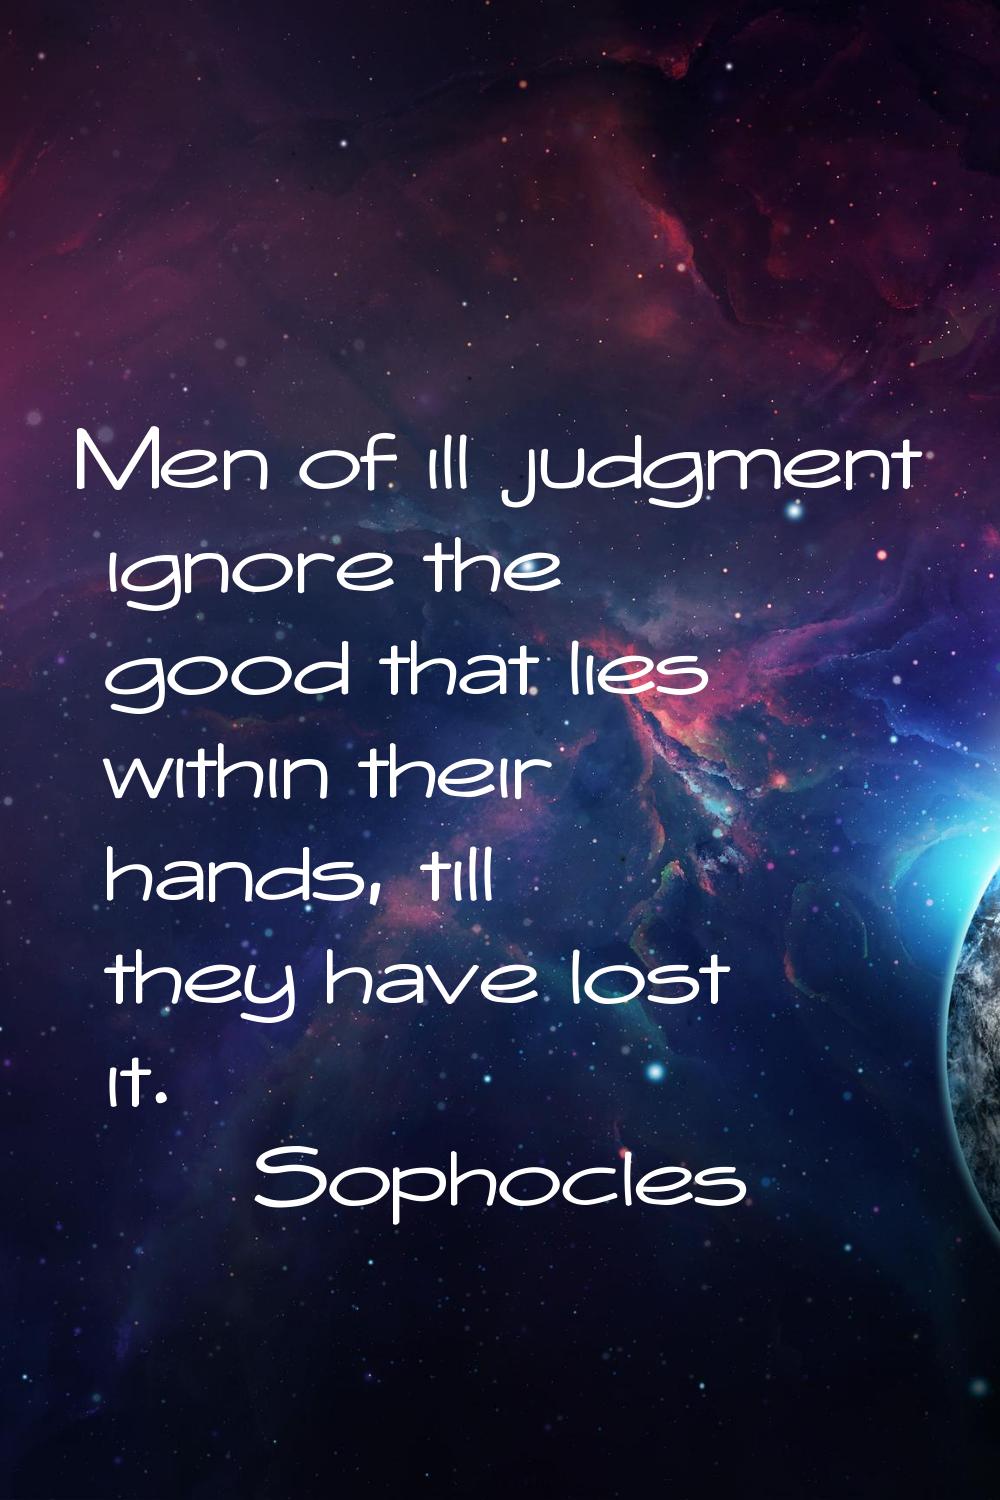 Men of ill judgment ignore the good that lies within their hands, till they have lost it.